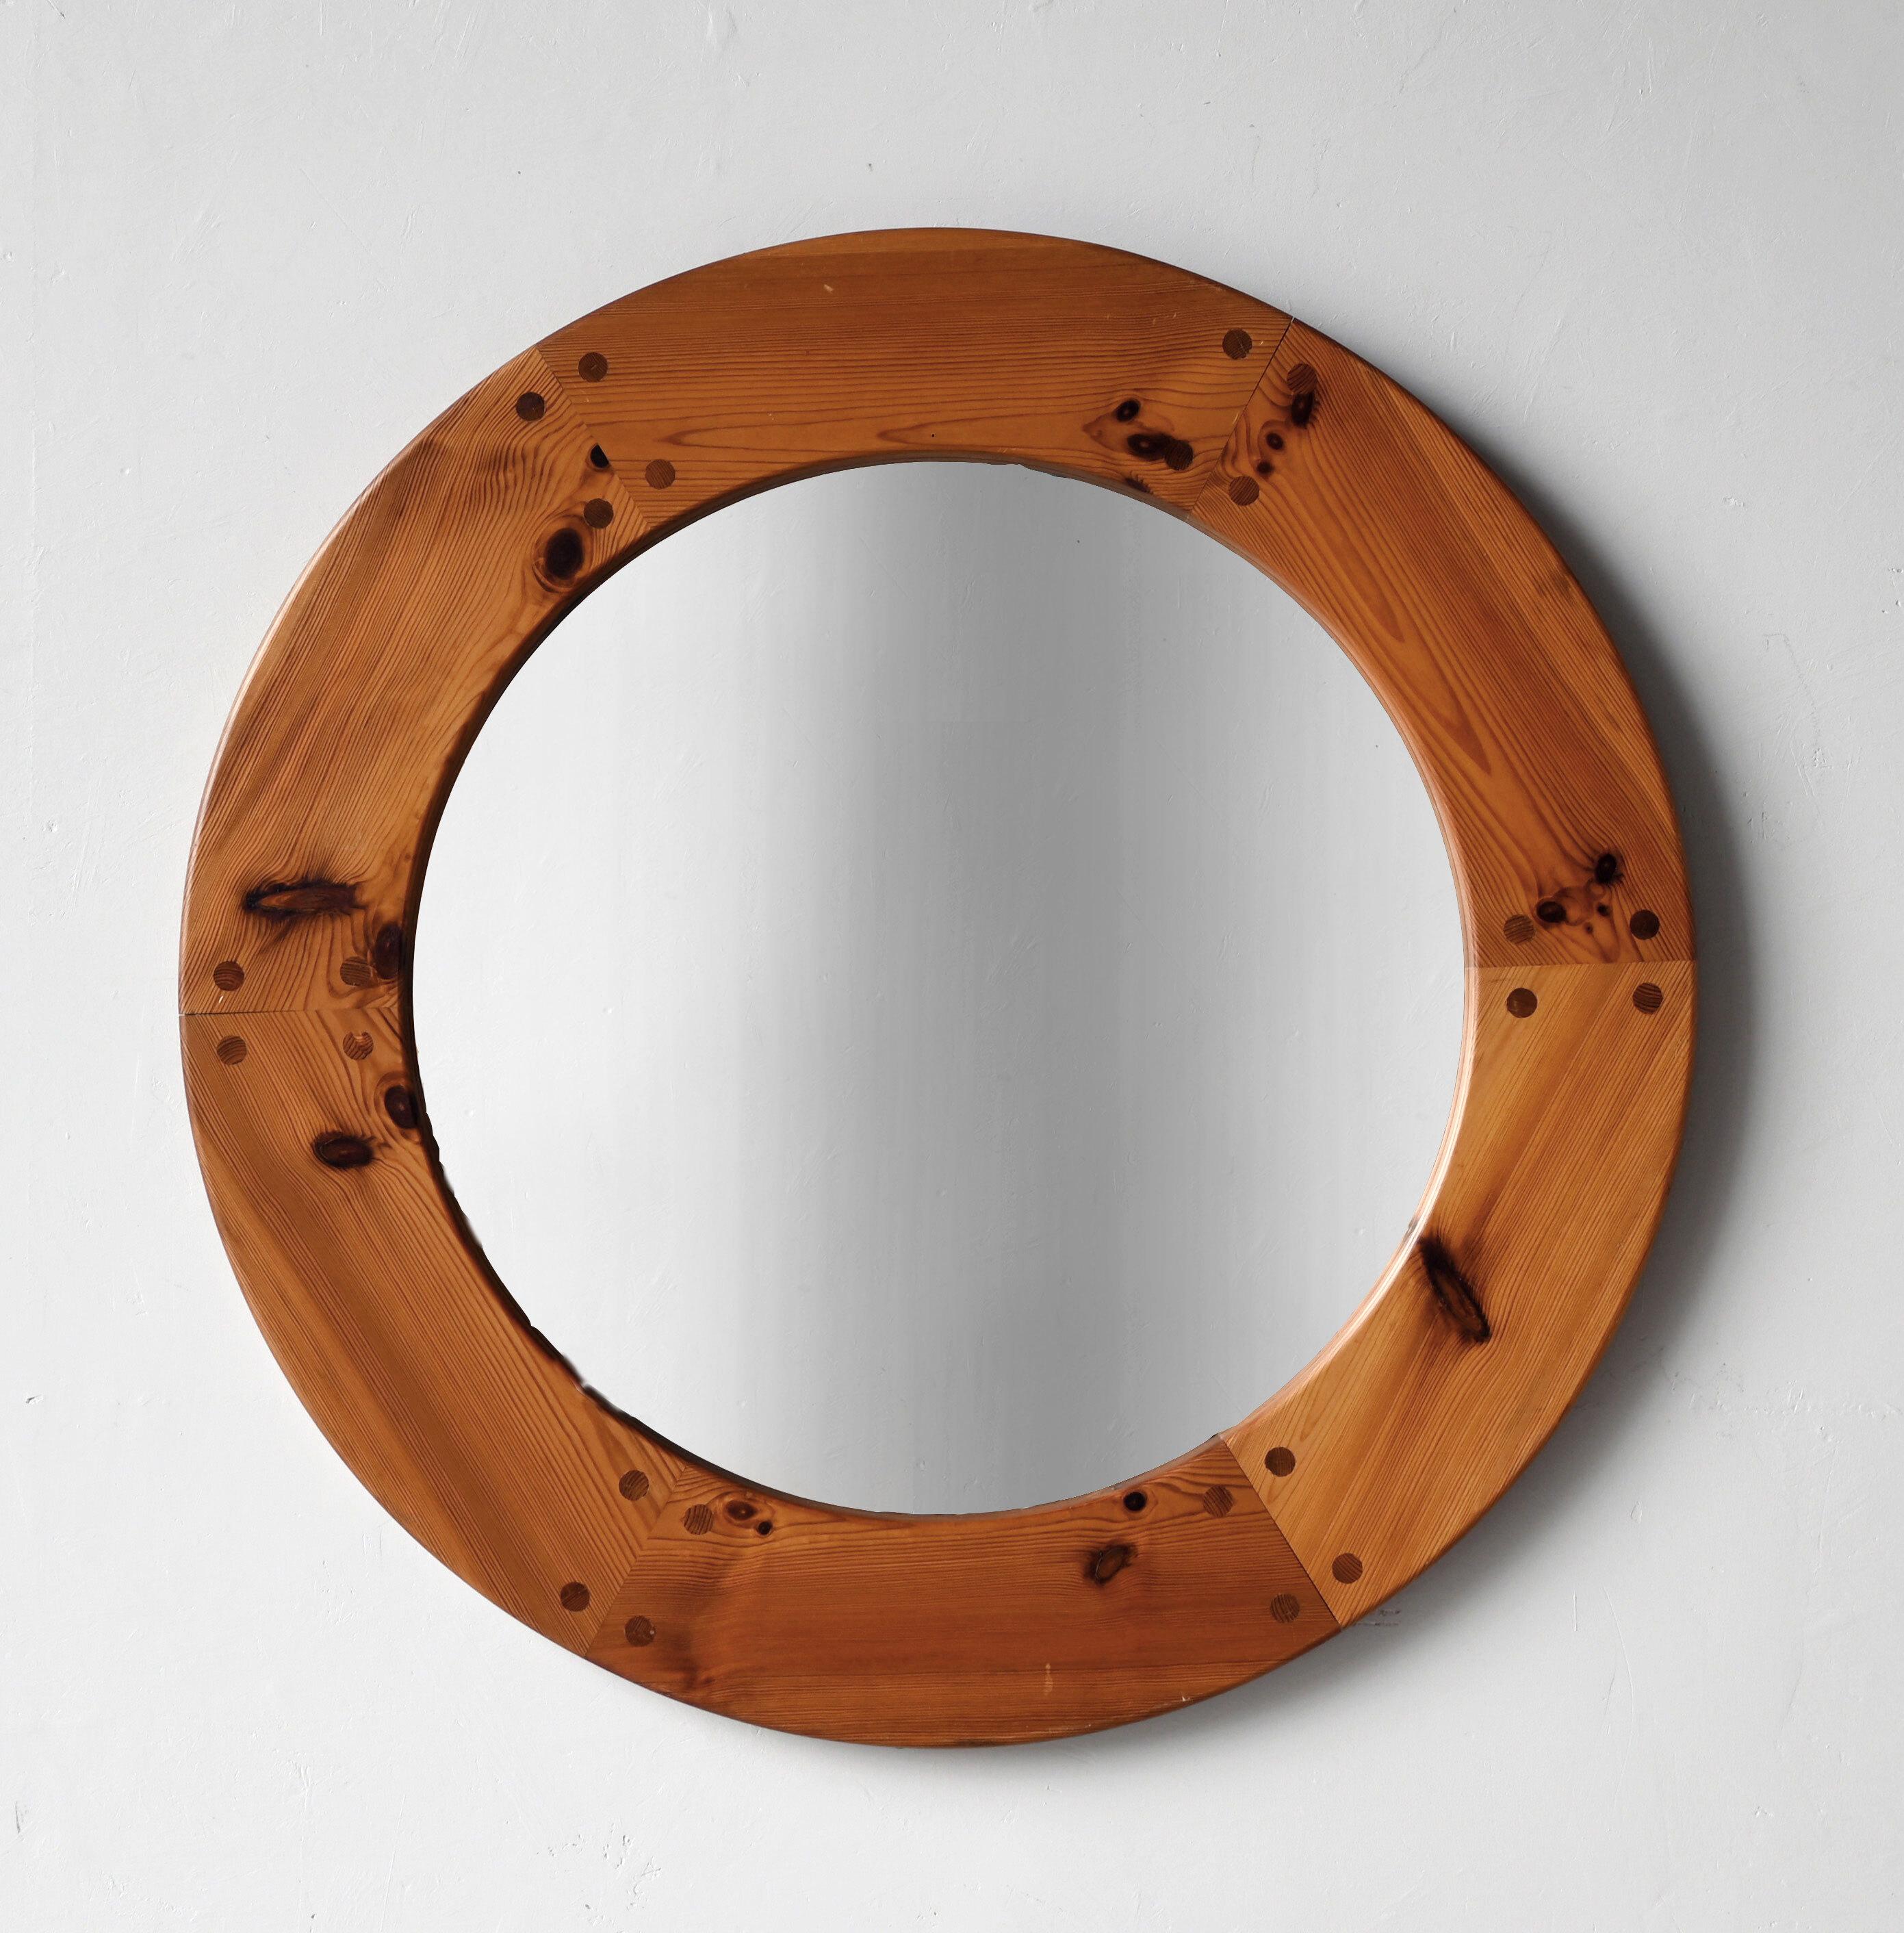 A sculptural round wall mirror. Rare very large version. Designed by Uno Kristiansson, for Luxus, Sweden, 1960s. Features revealed teak-colored joinery. 

Other designers of the period include Axel Einar Hjorth, Roland Wilhelmsson, Charlotte